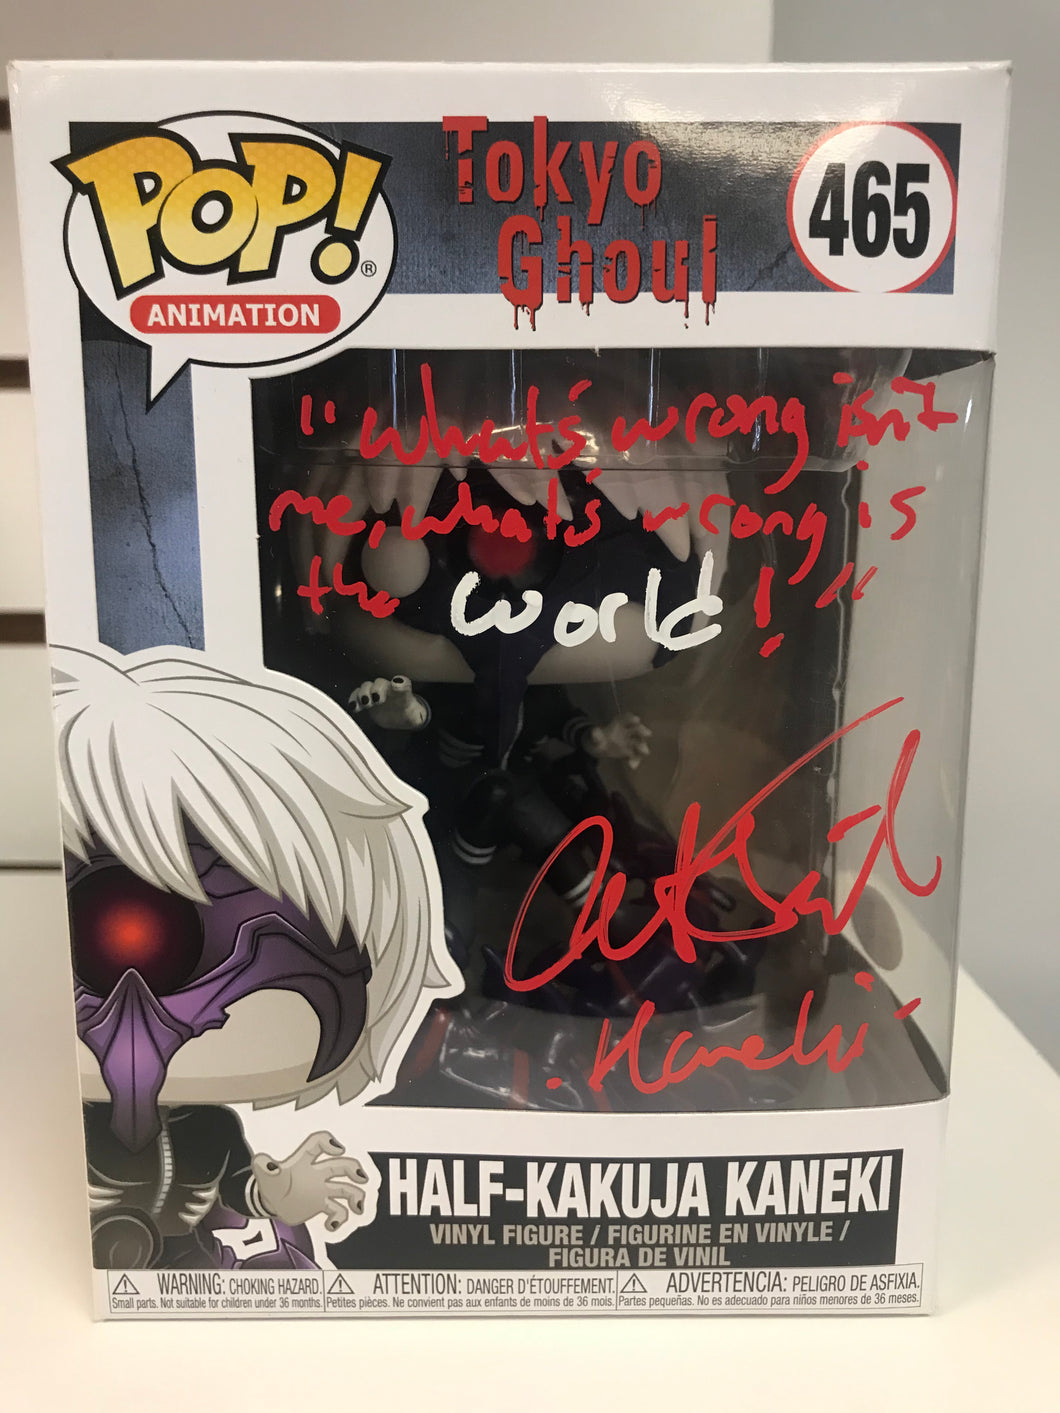 Funko Pop Half-Kakuja Kaneki (Autographed By Austin Tindle With Quote And JSA Certification)